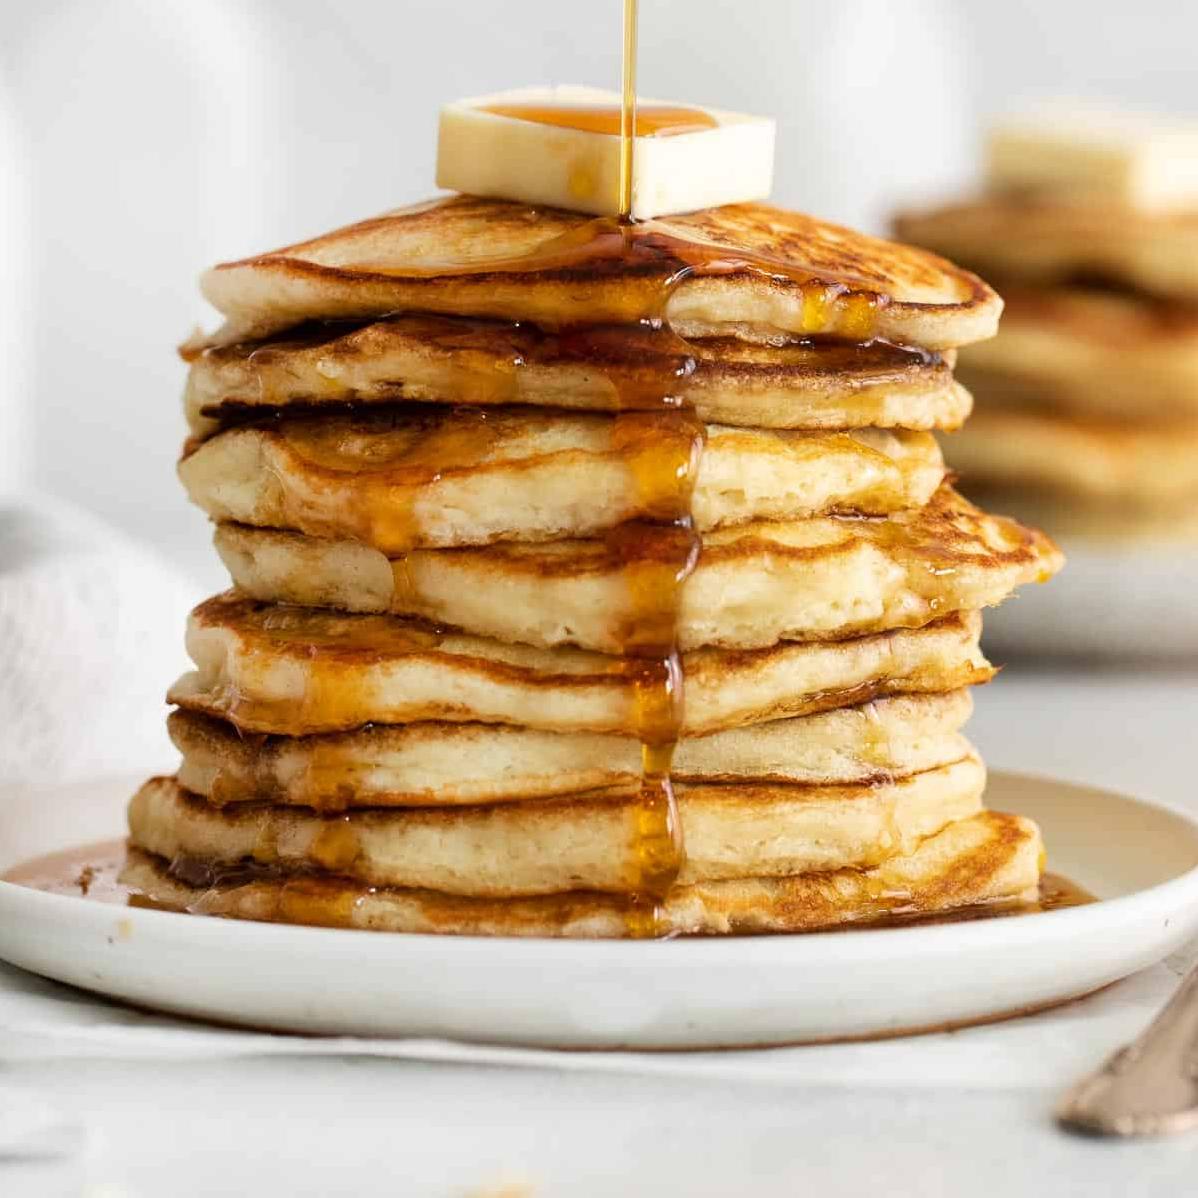  This recipe makes pancakes that are so delicious, you'll be surprised they're dairy-free as well.